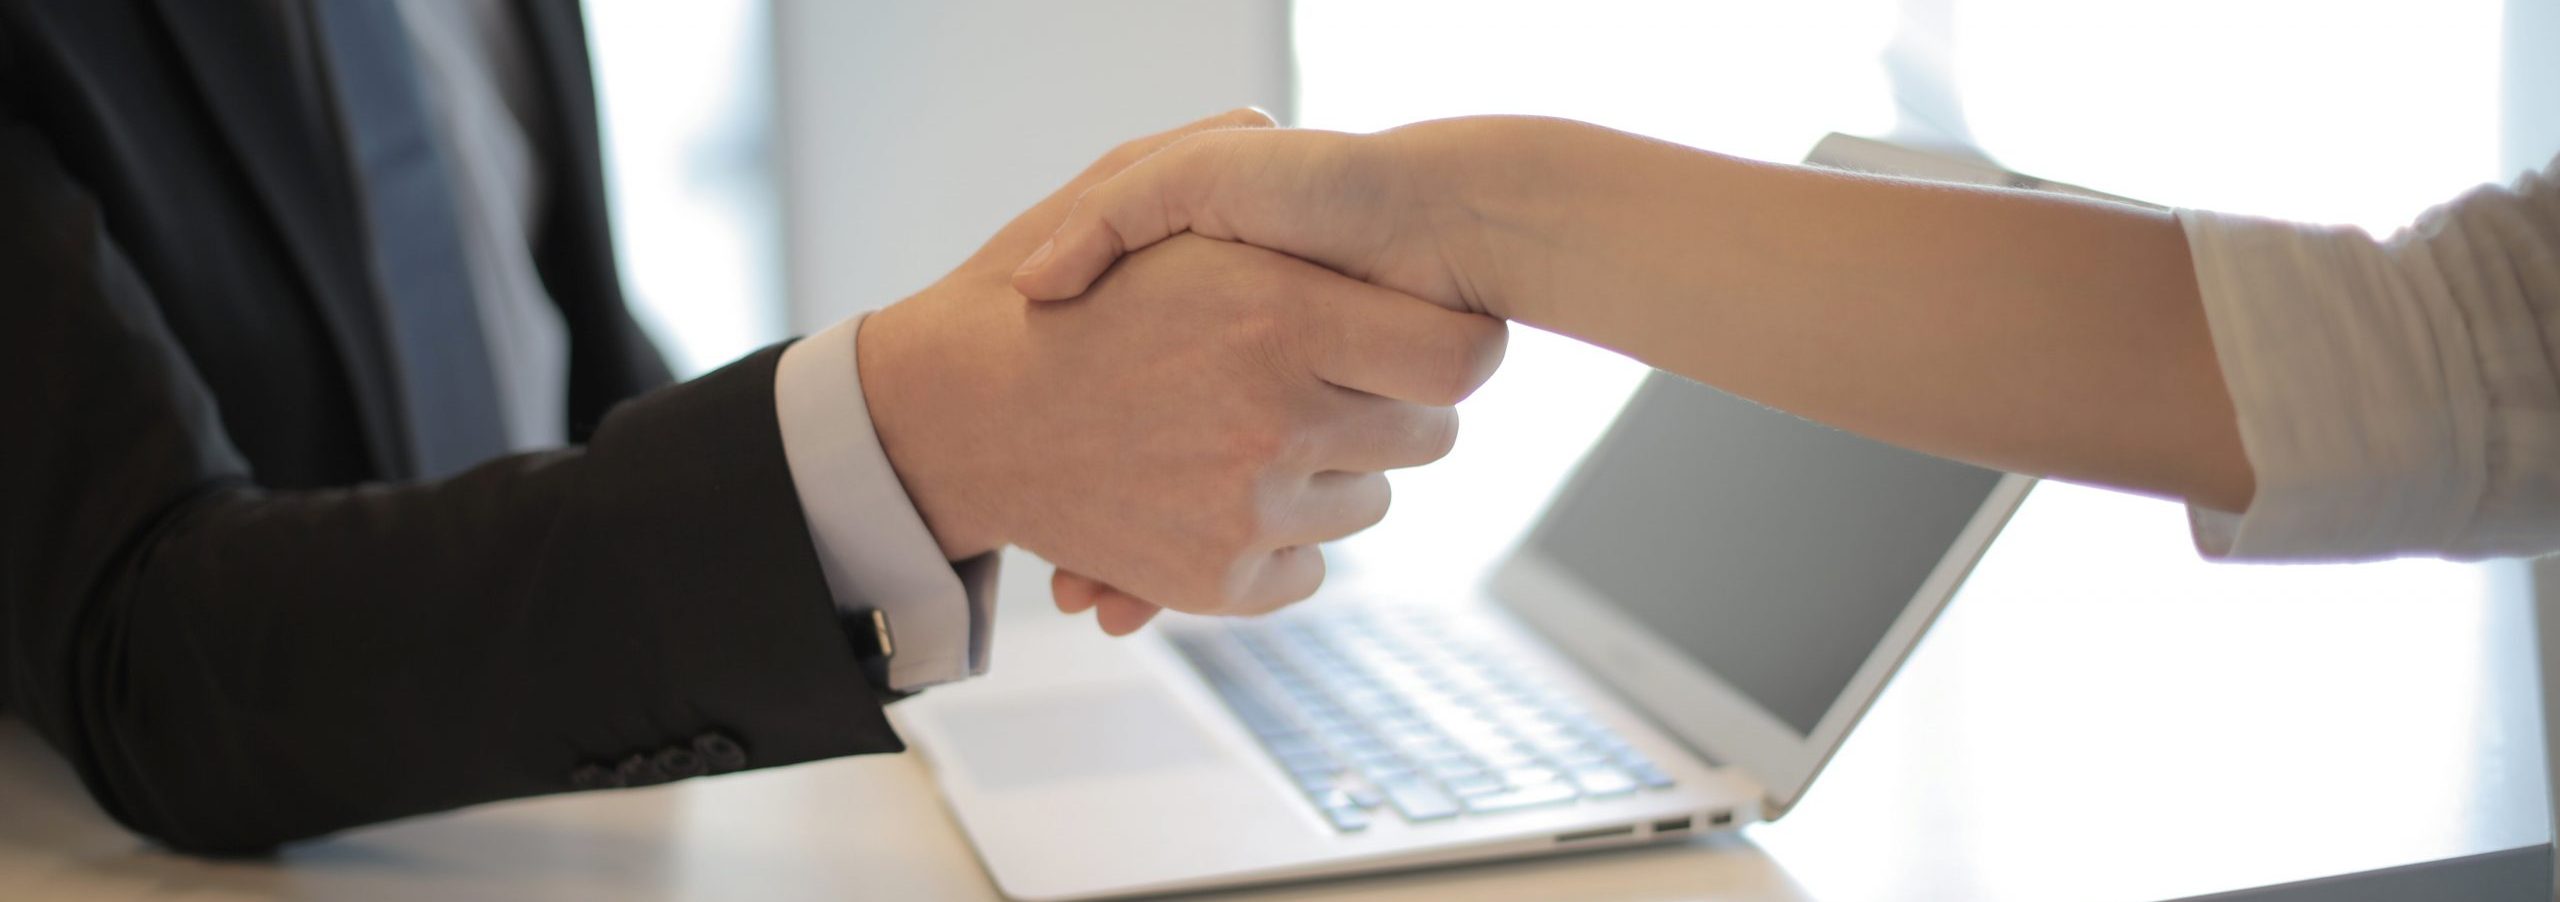 Employee and Employer shaking hands